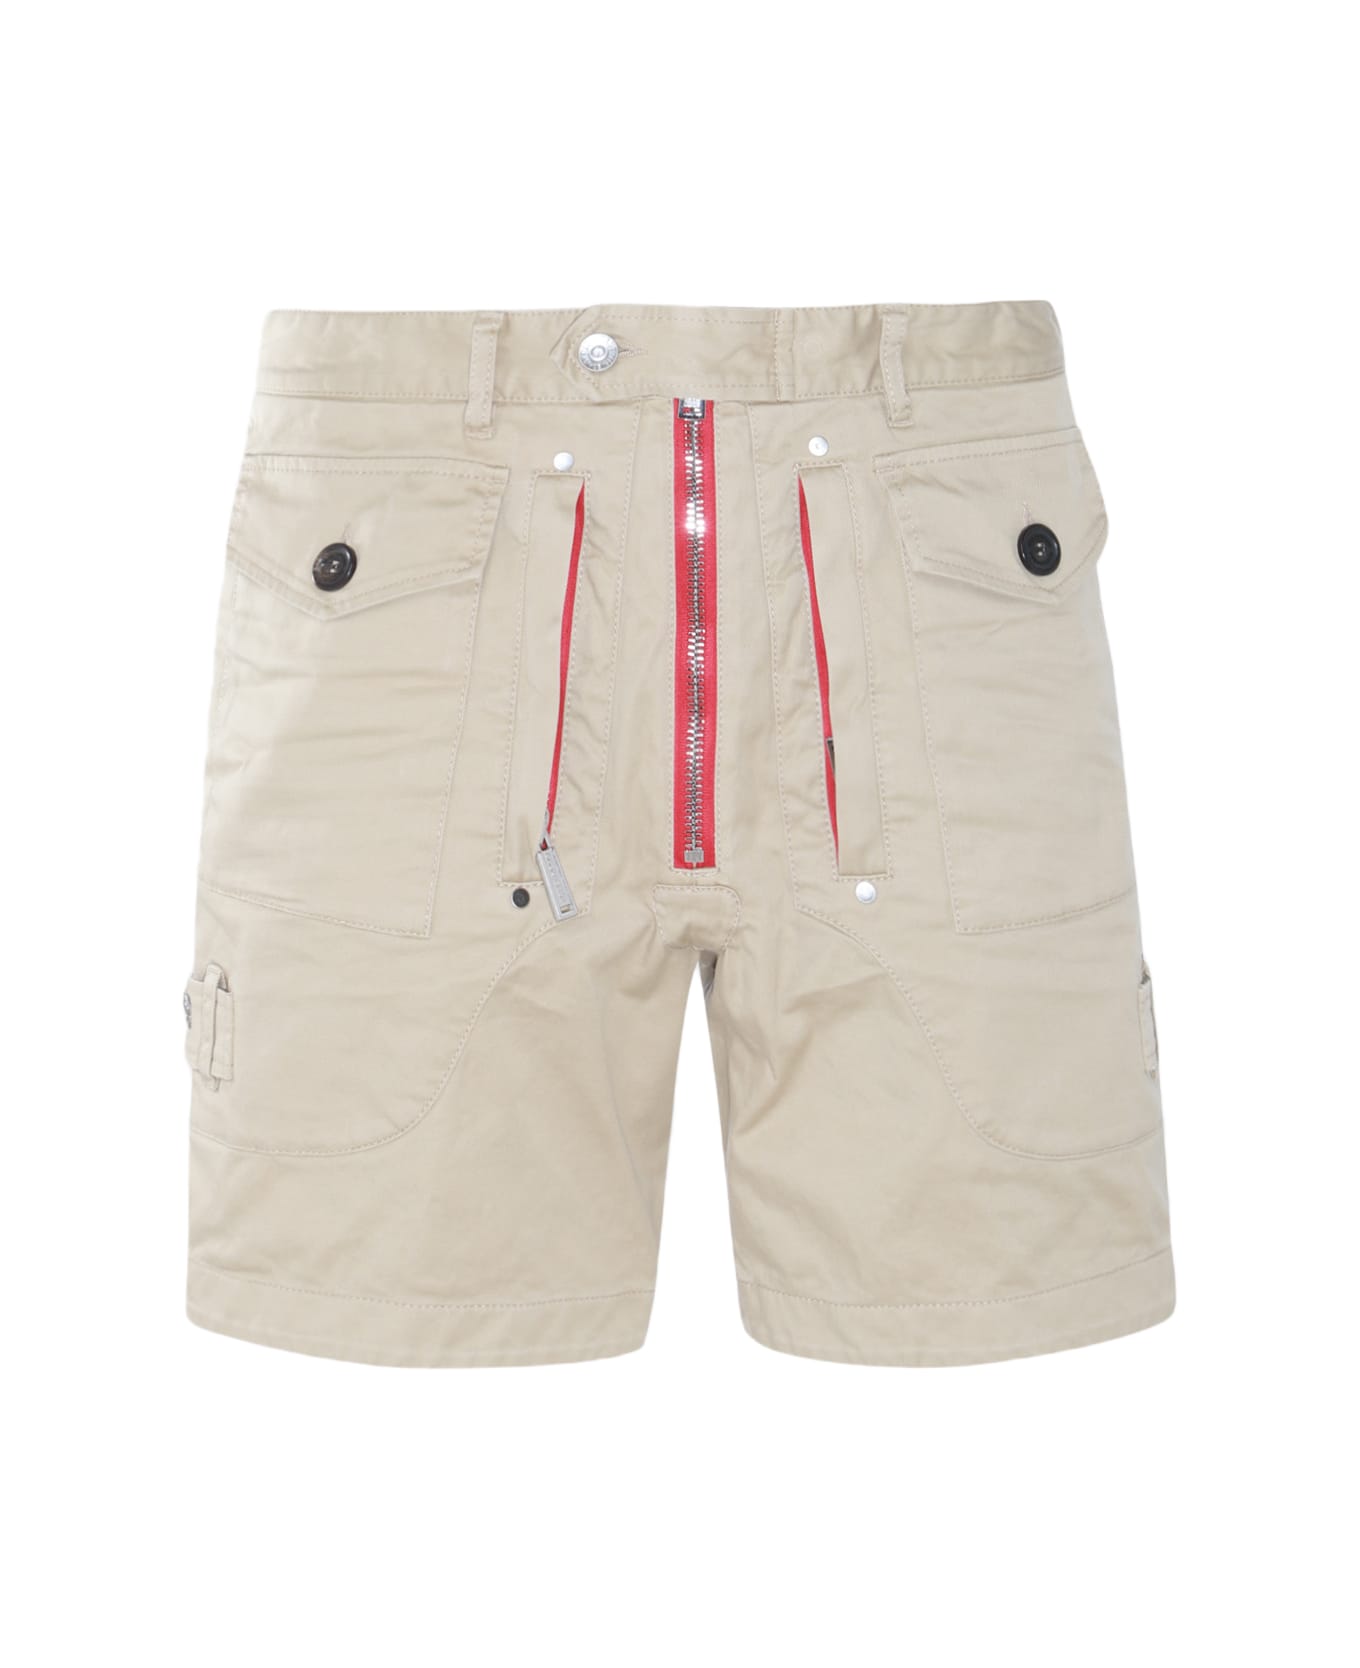 Dsquared2 Beige And Red Cotton Blend Shorts - Stone